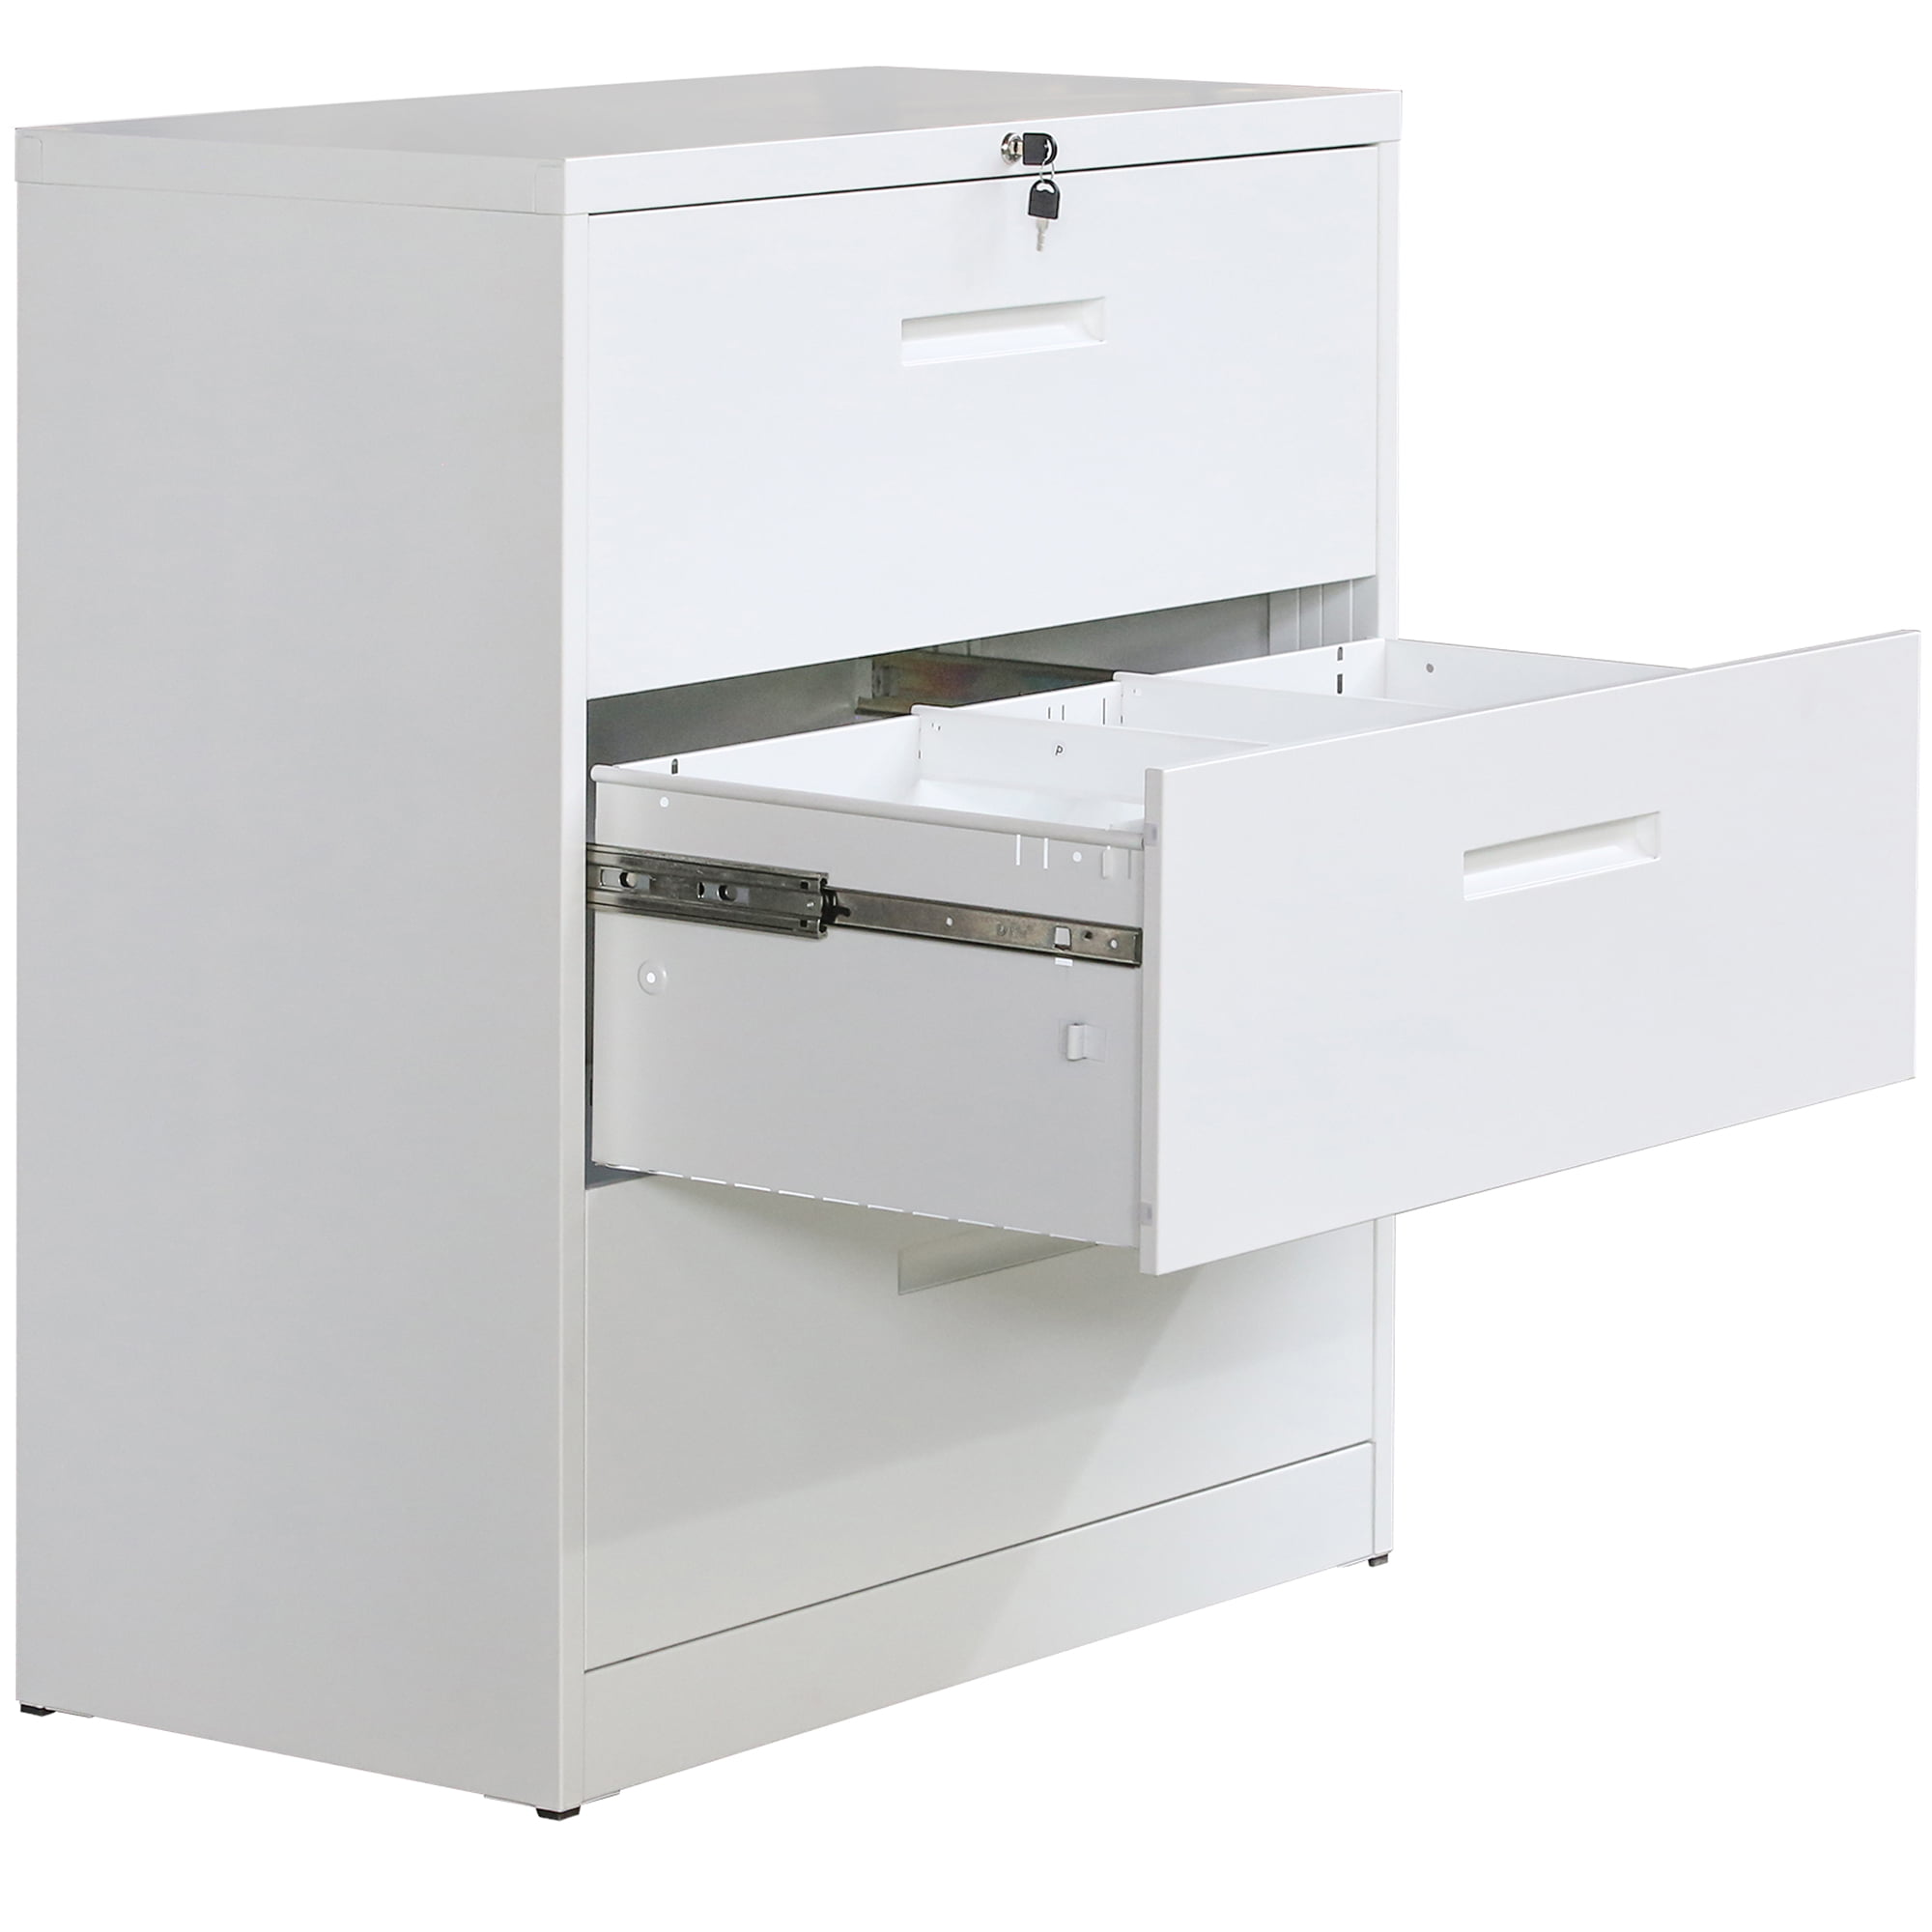 Metal Storage Filing Cabinet Lateral File Cabinet  Lockable Cabinet w/ Drawers 